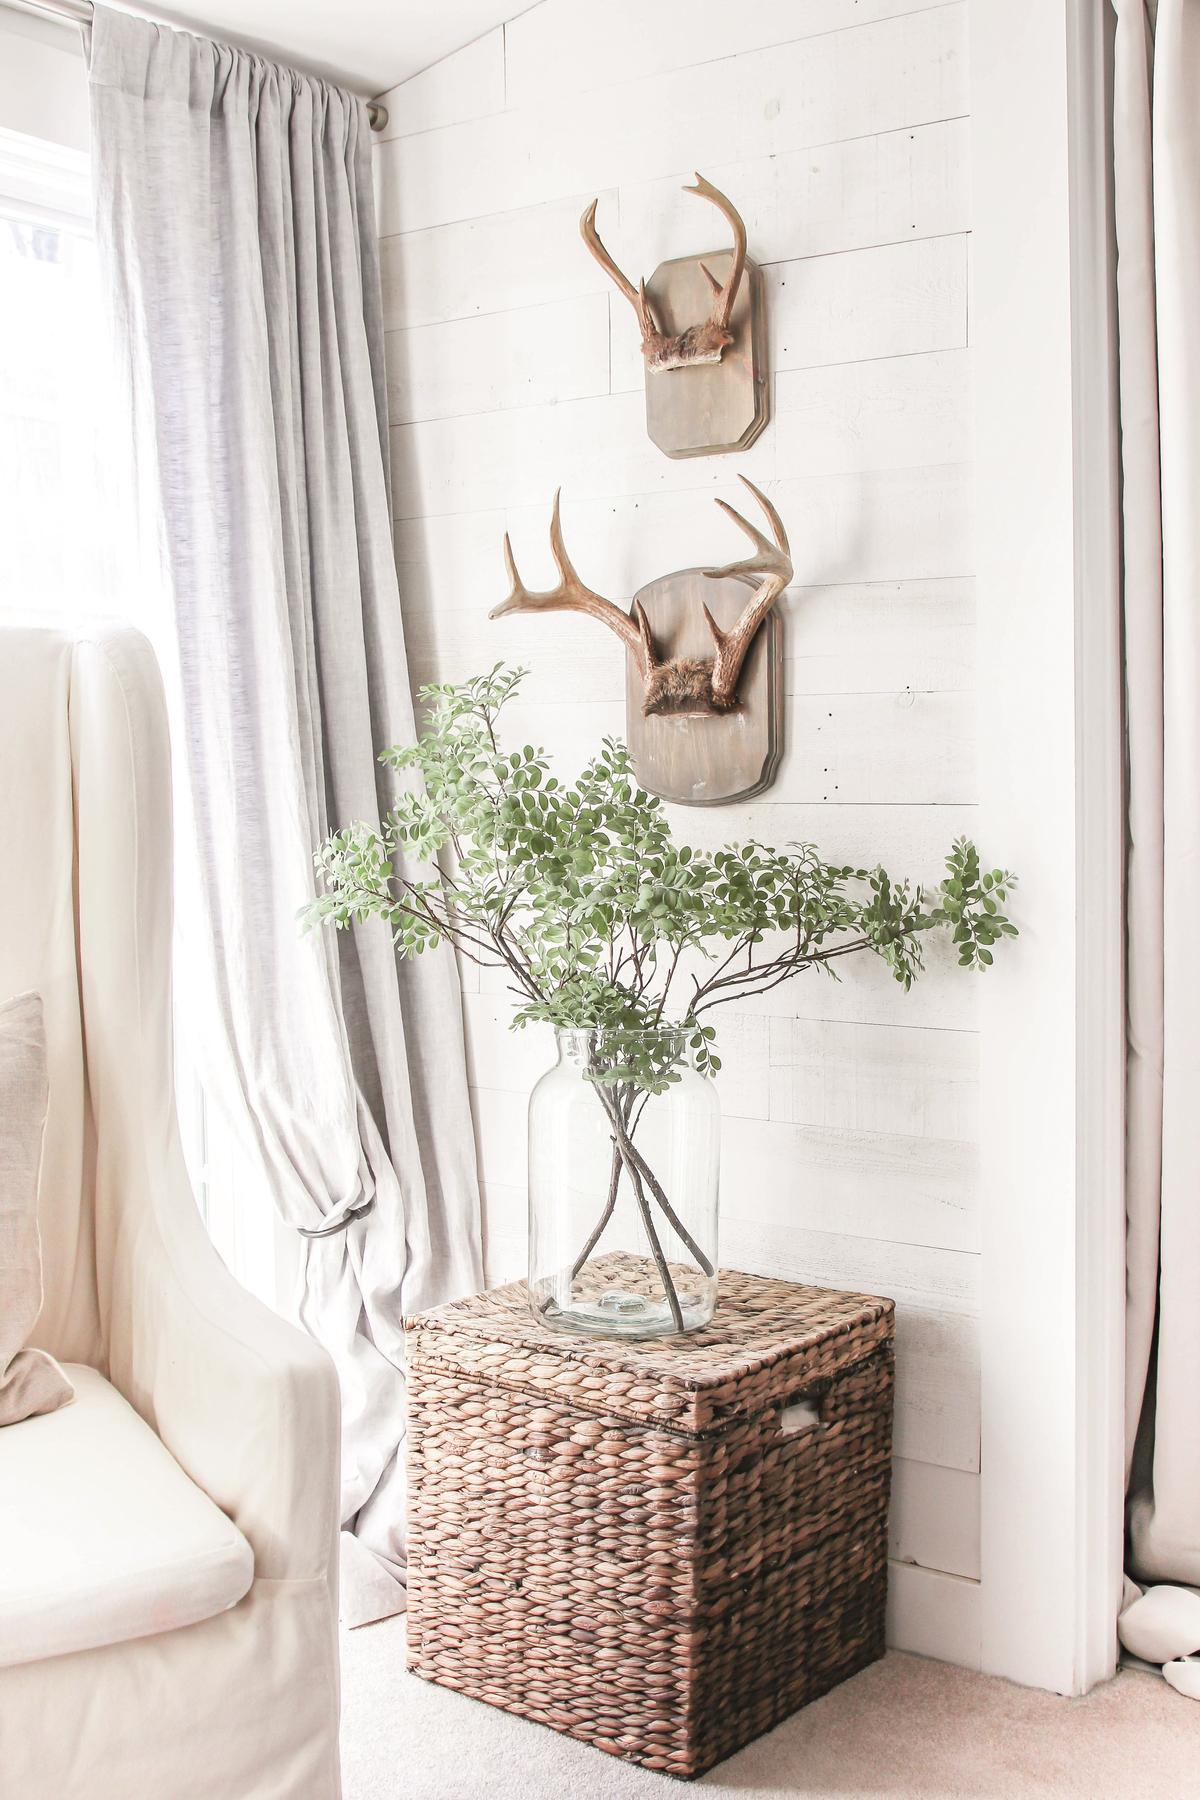 Decorate your flex space in a way that makes it cozy and inspiring to you. (Bre Doucette)